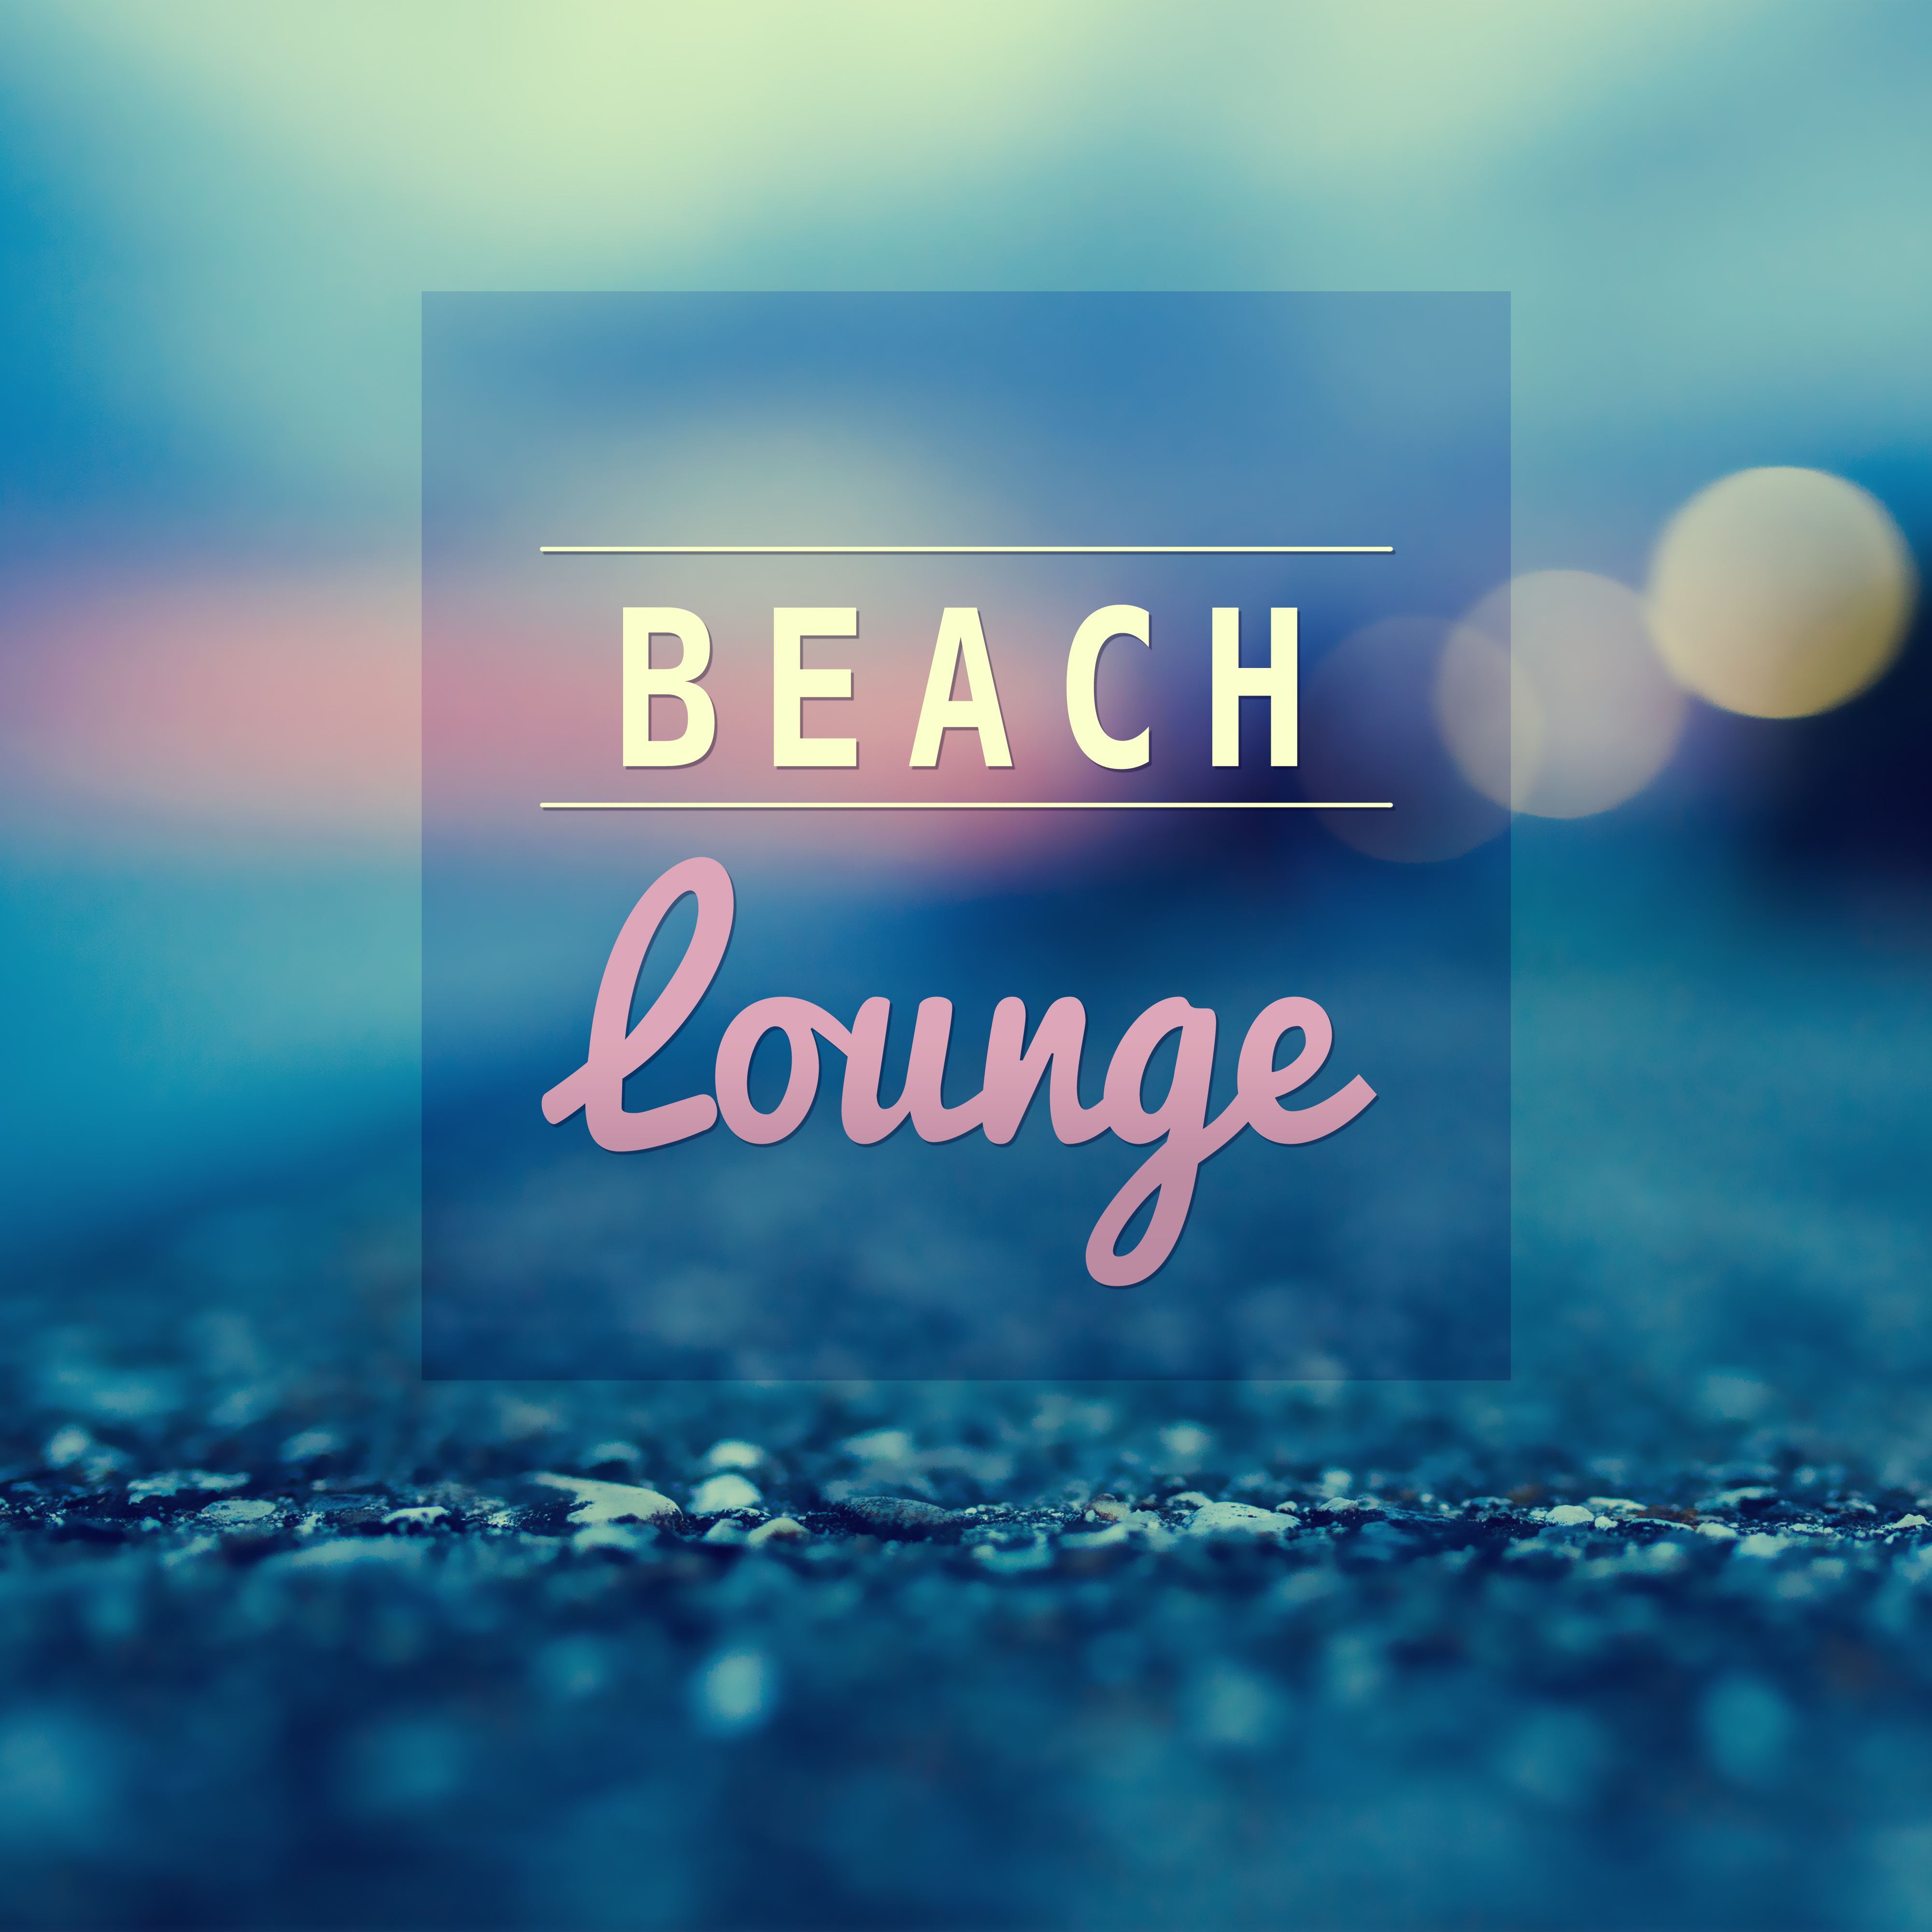 Beach Lounge – Chill Sounds, Holiday Music, Tranquility, Chill Meditation